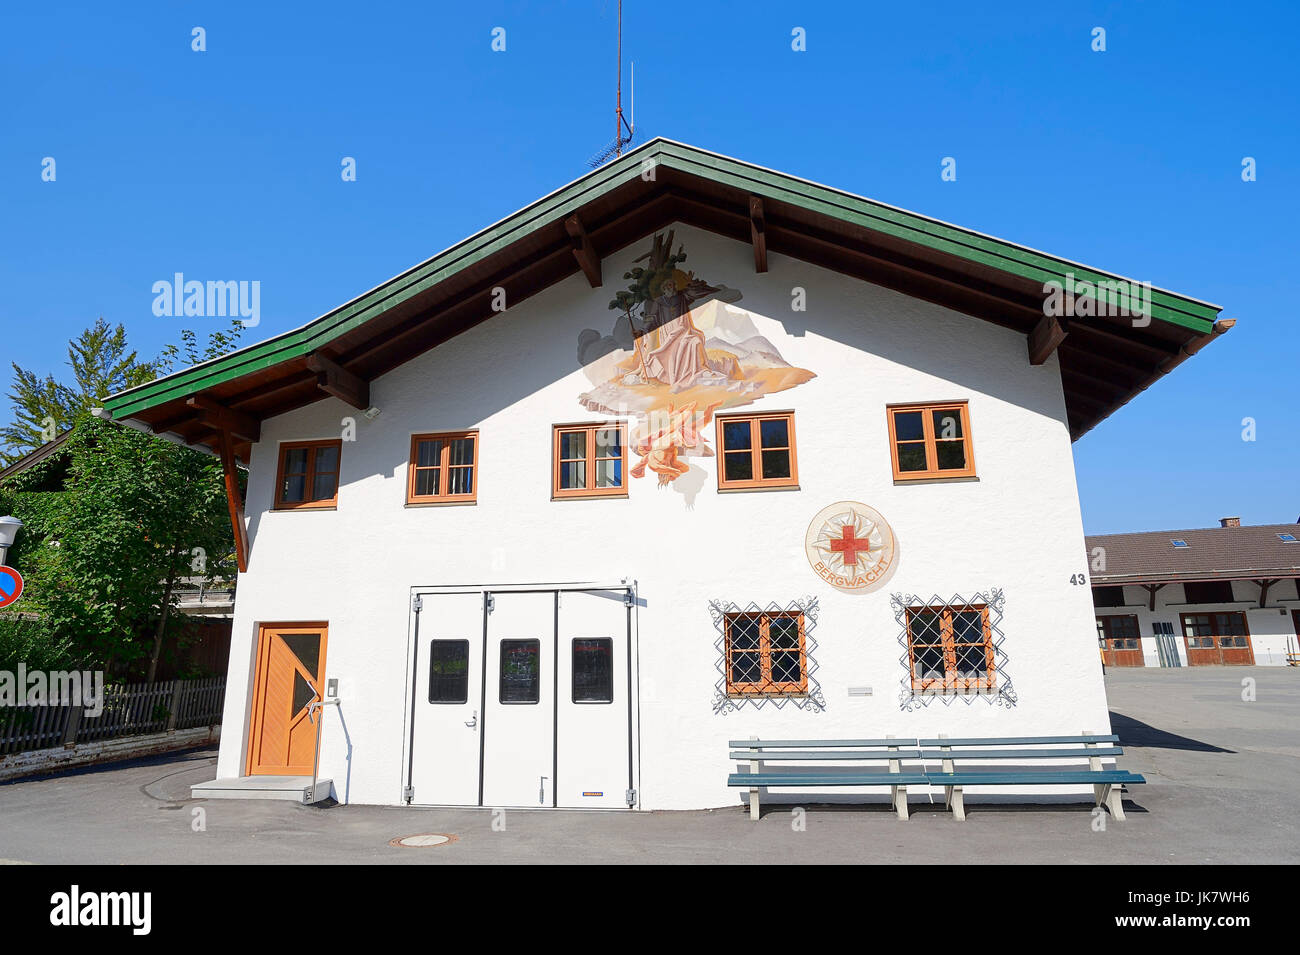 Building of the mountain rescue service with paintings, Mittenwald, Werdenfelser Land, Bavaria, Germany Stock Photo